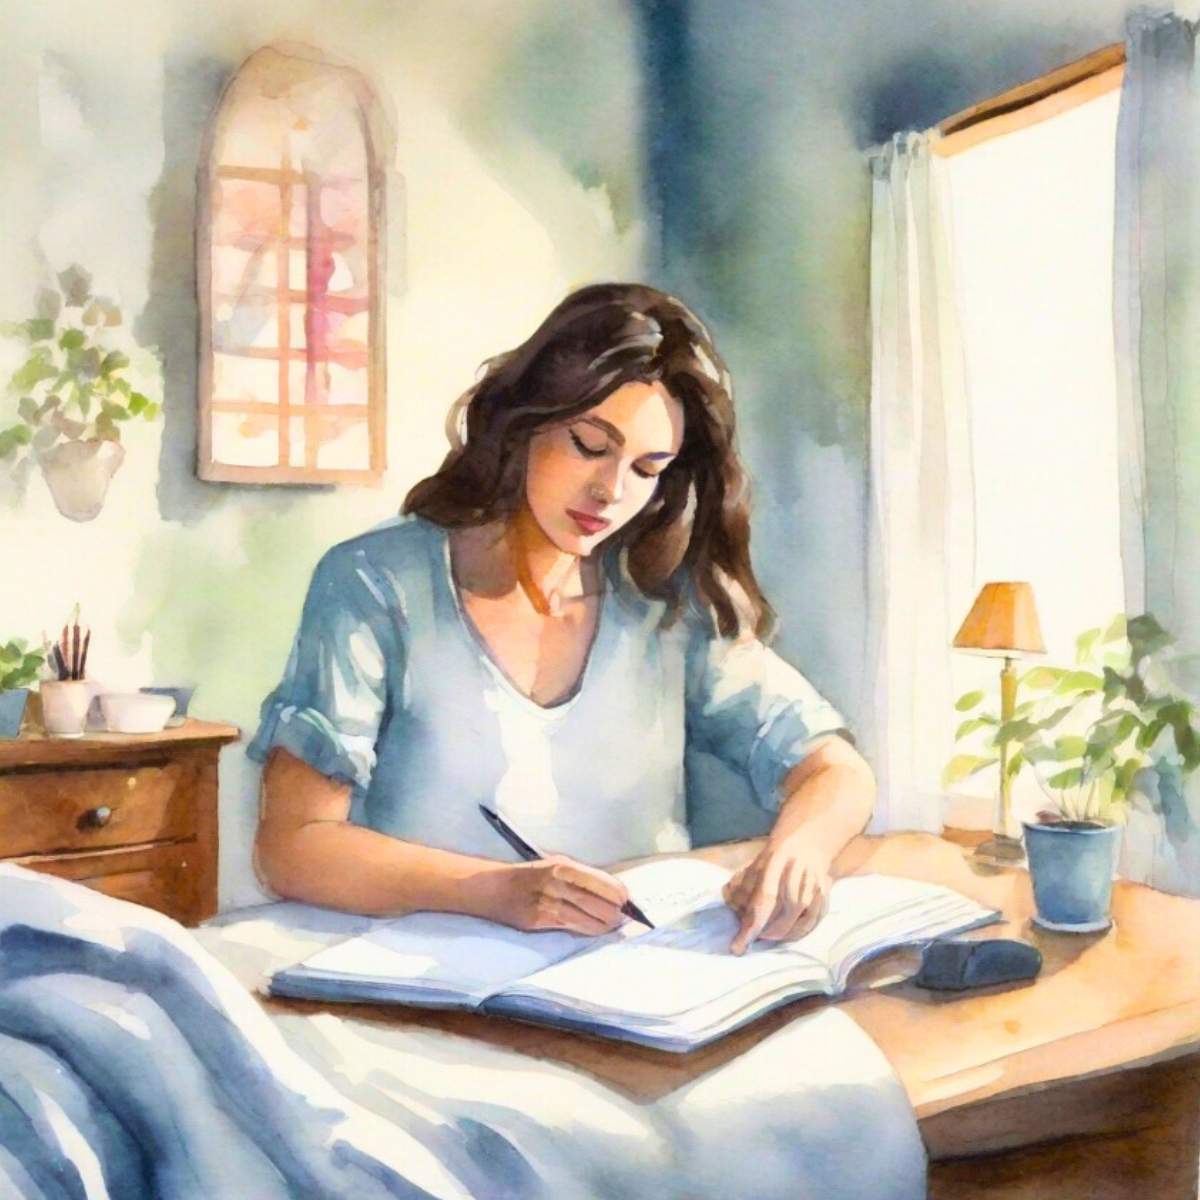 A watercolour style picture of a woman writing in a journal.